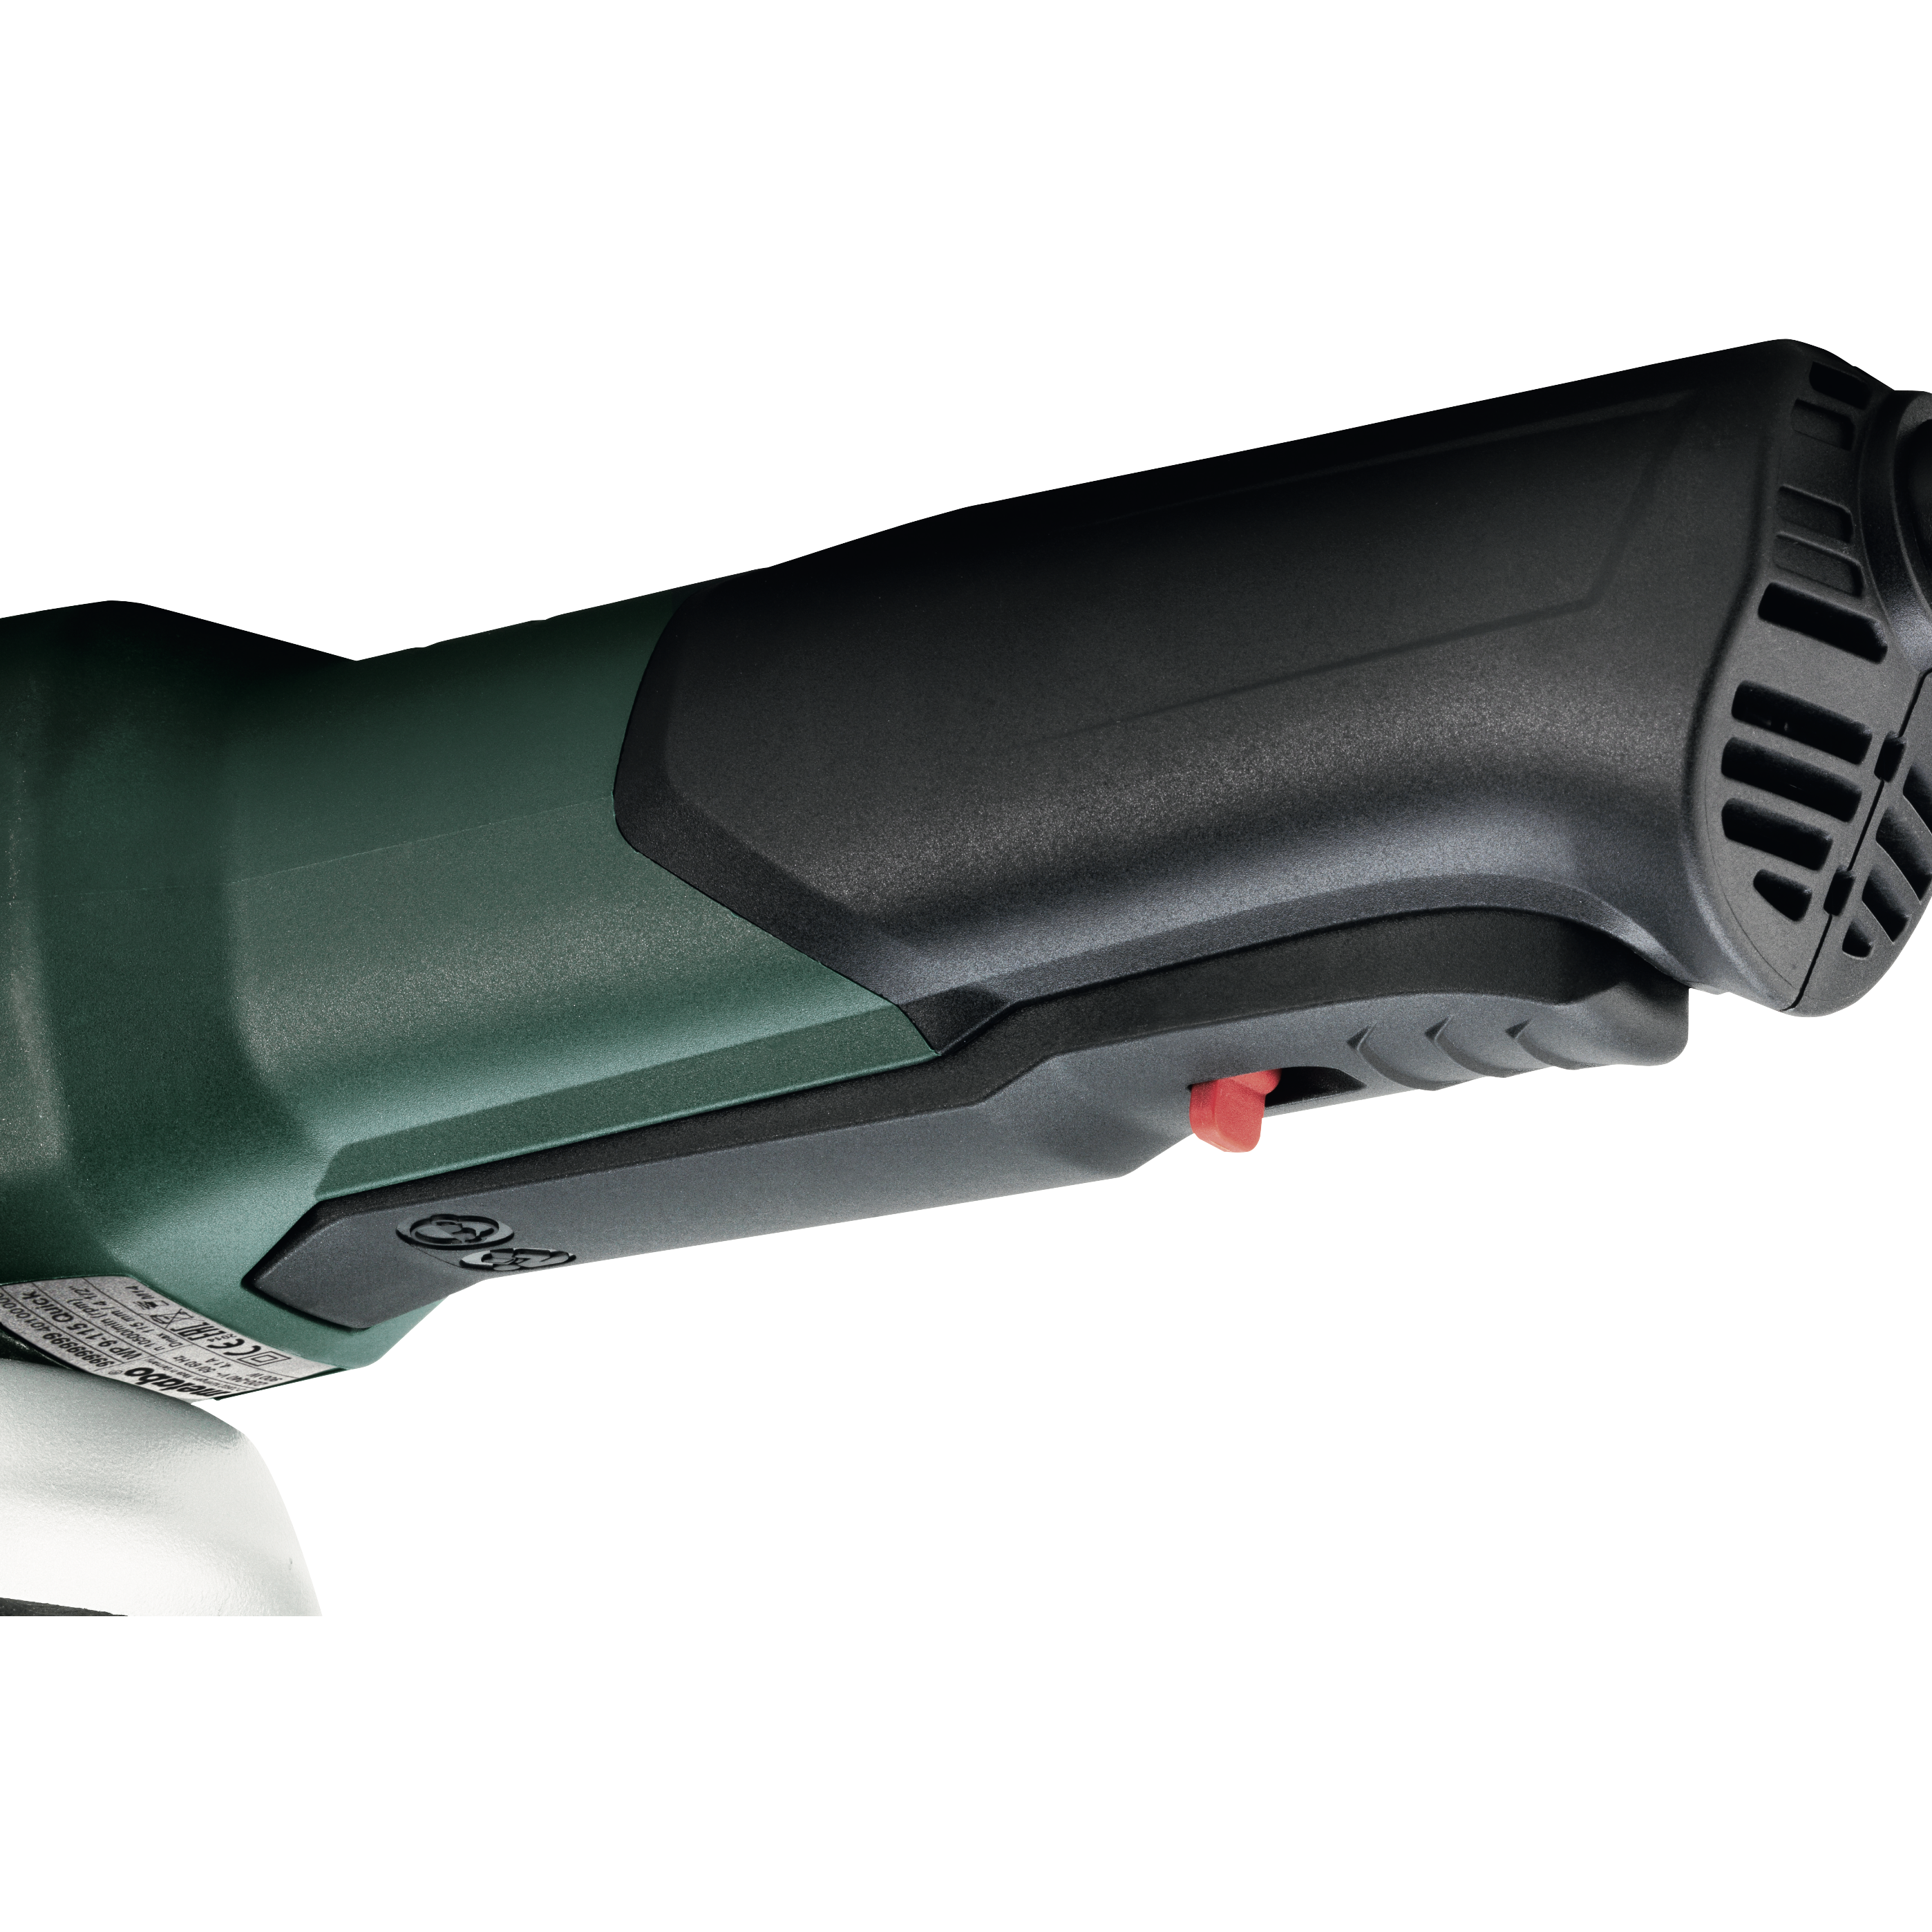 Metabo WP 11-125 5" Quick Angle Grinder - 603624420